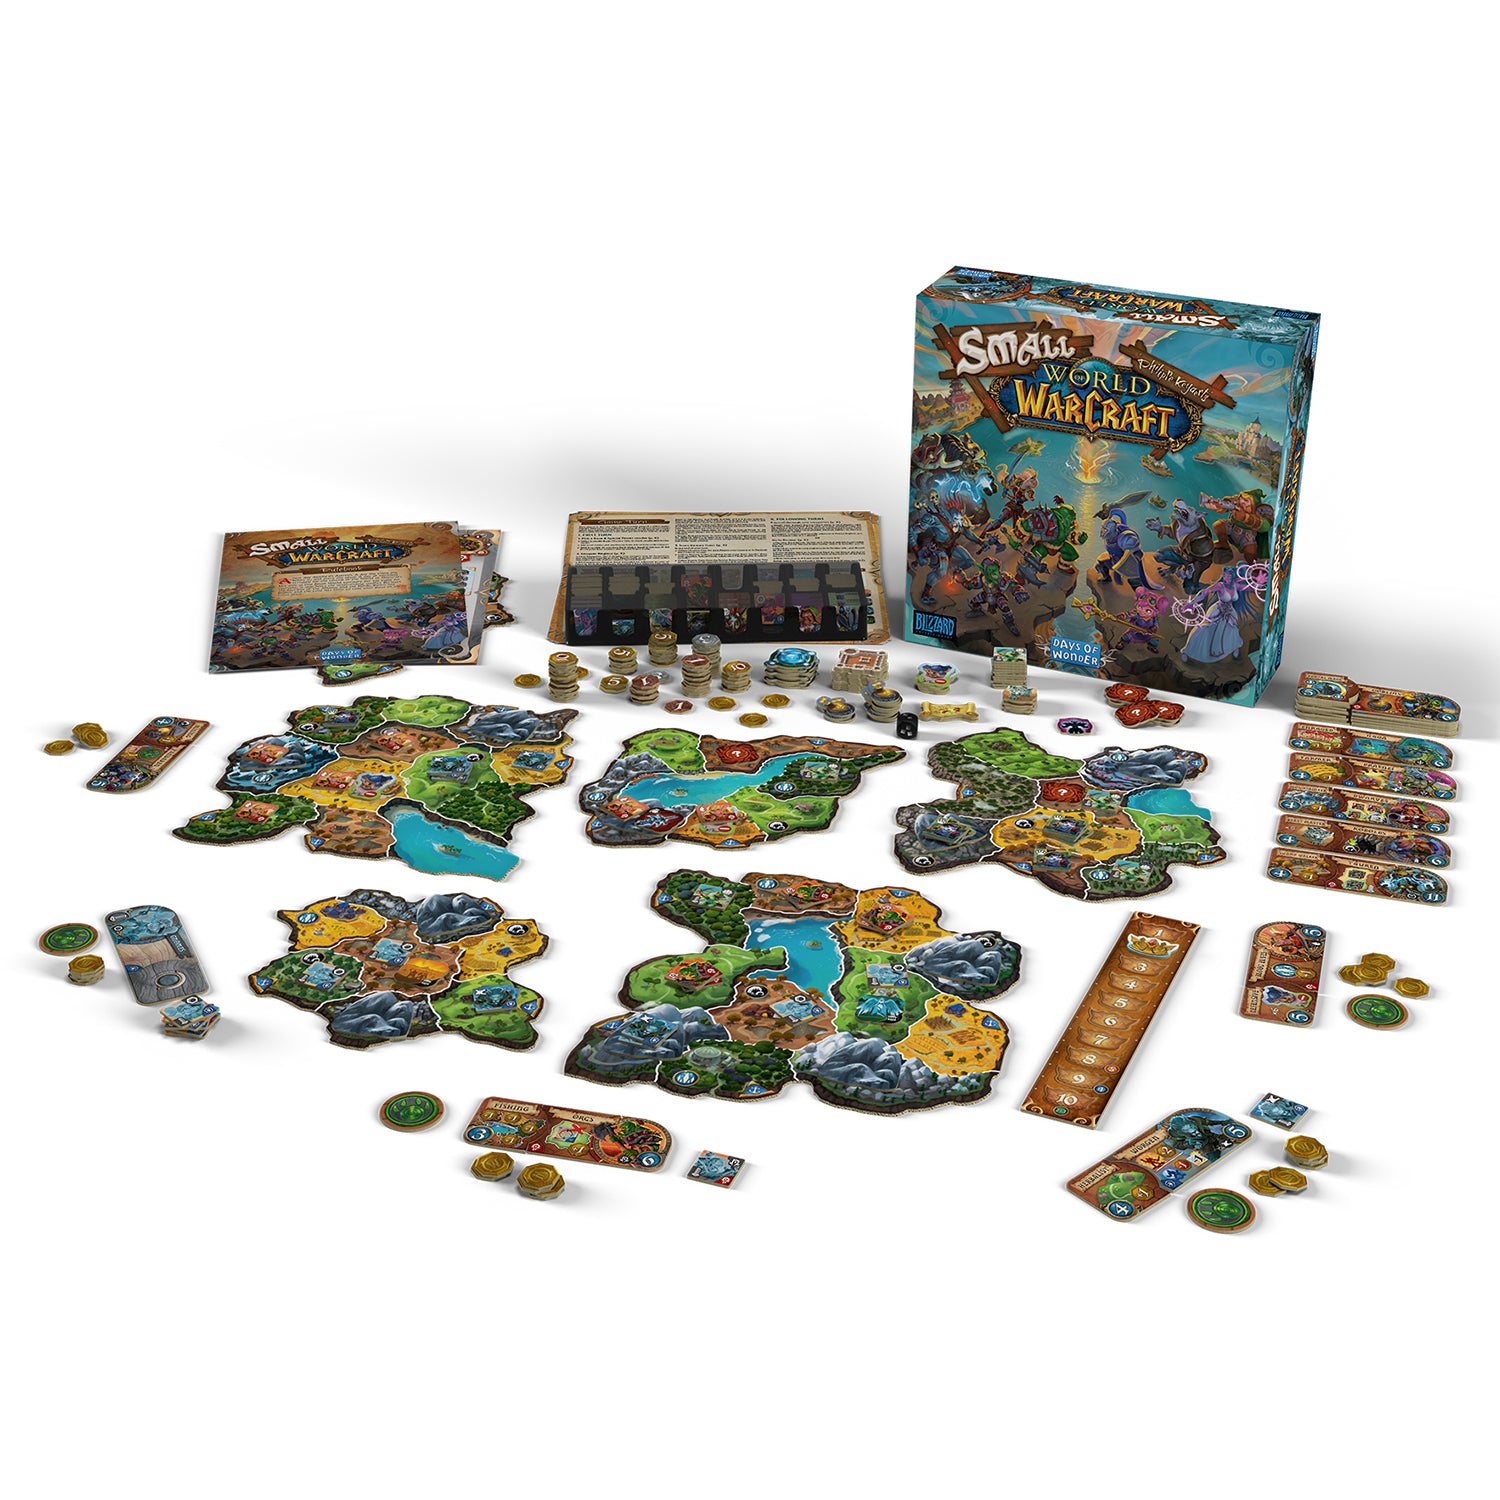 Small World of Warcraft Board Game in Blue - Open View